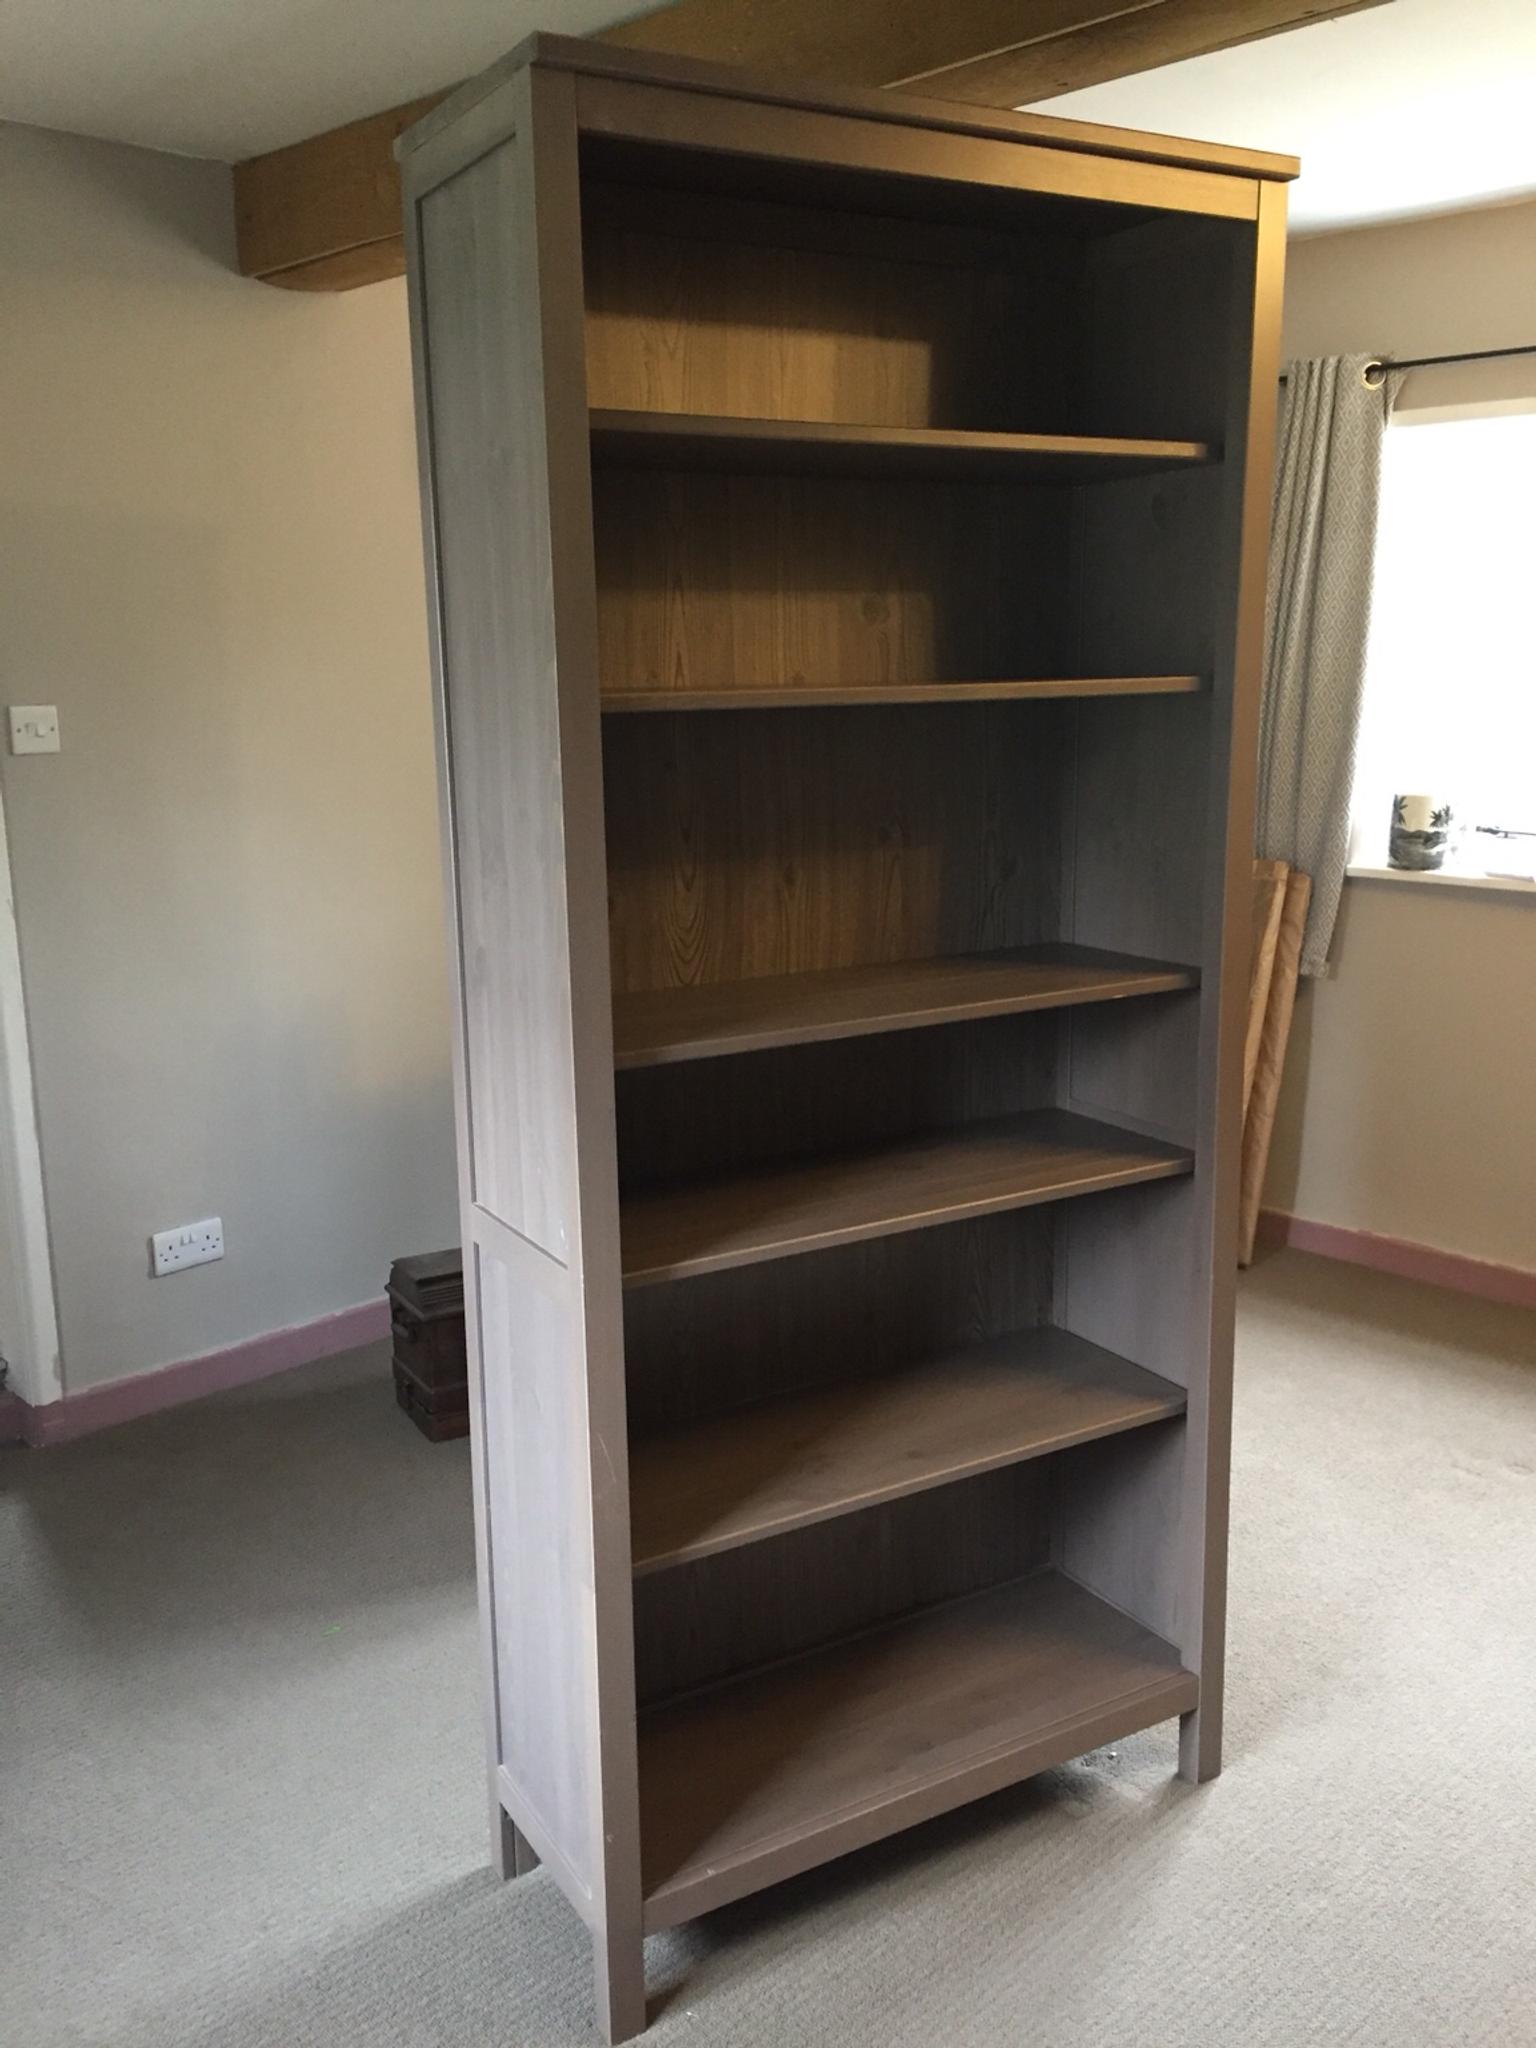 Ikea Hemnes Bookcase in OX14 Oxfordshire for £30.00 for sale | Shpock